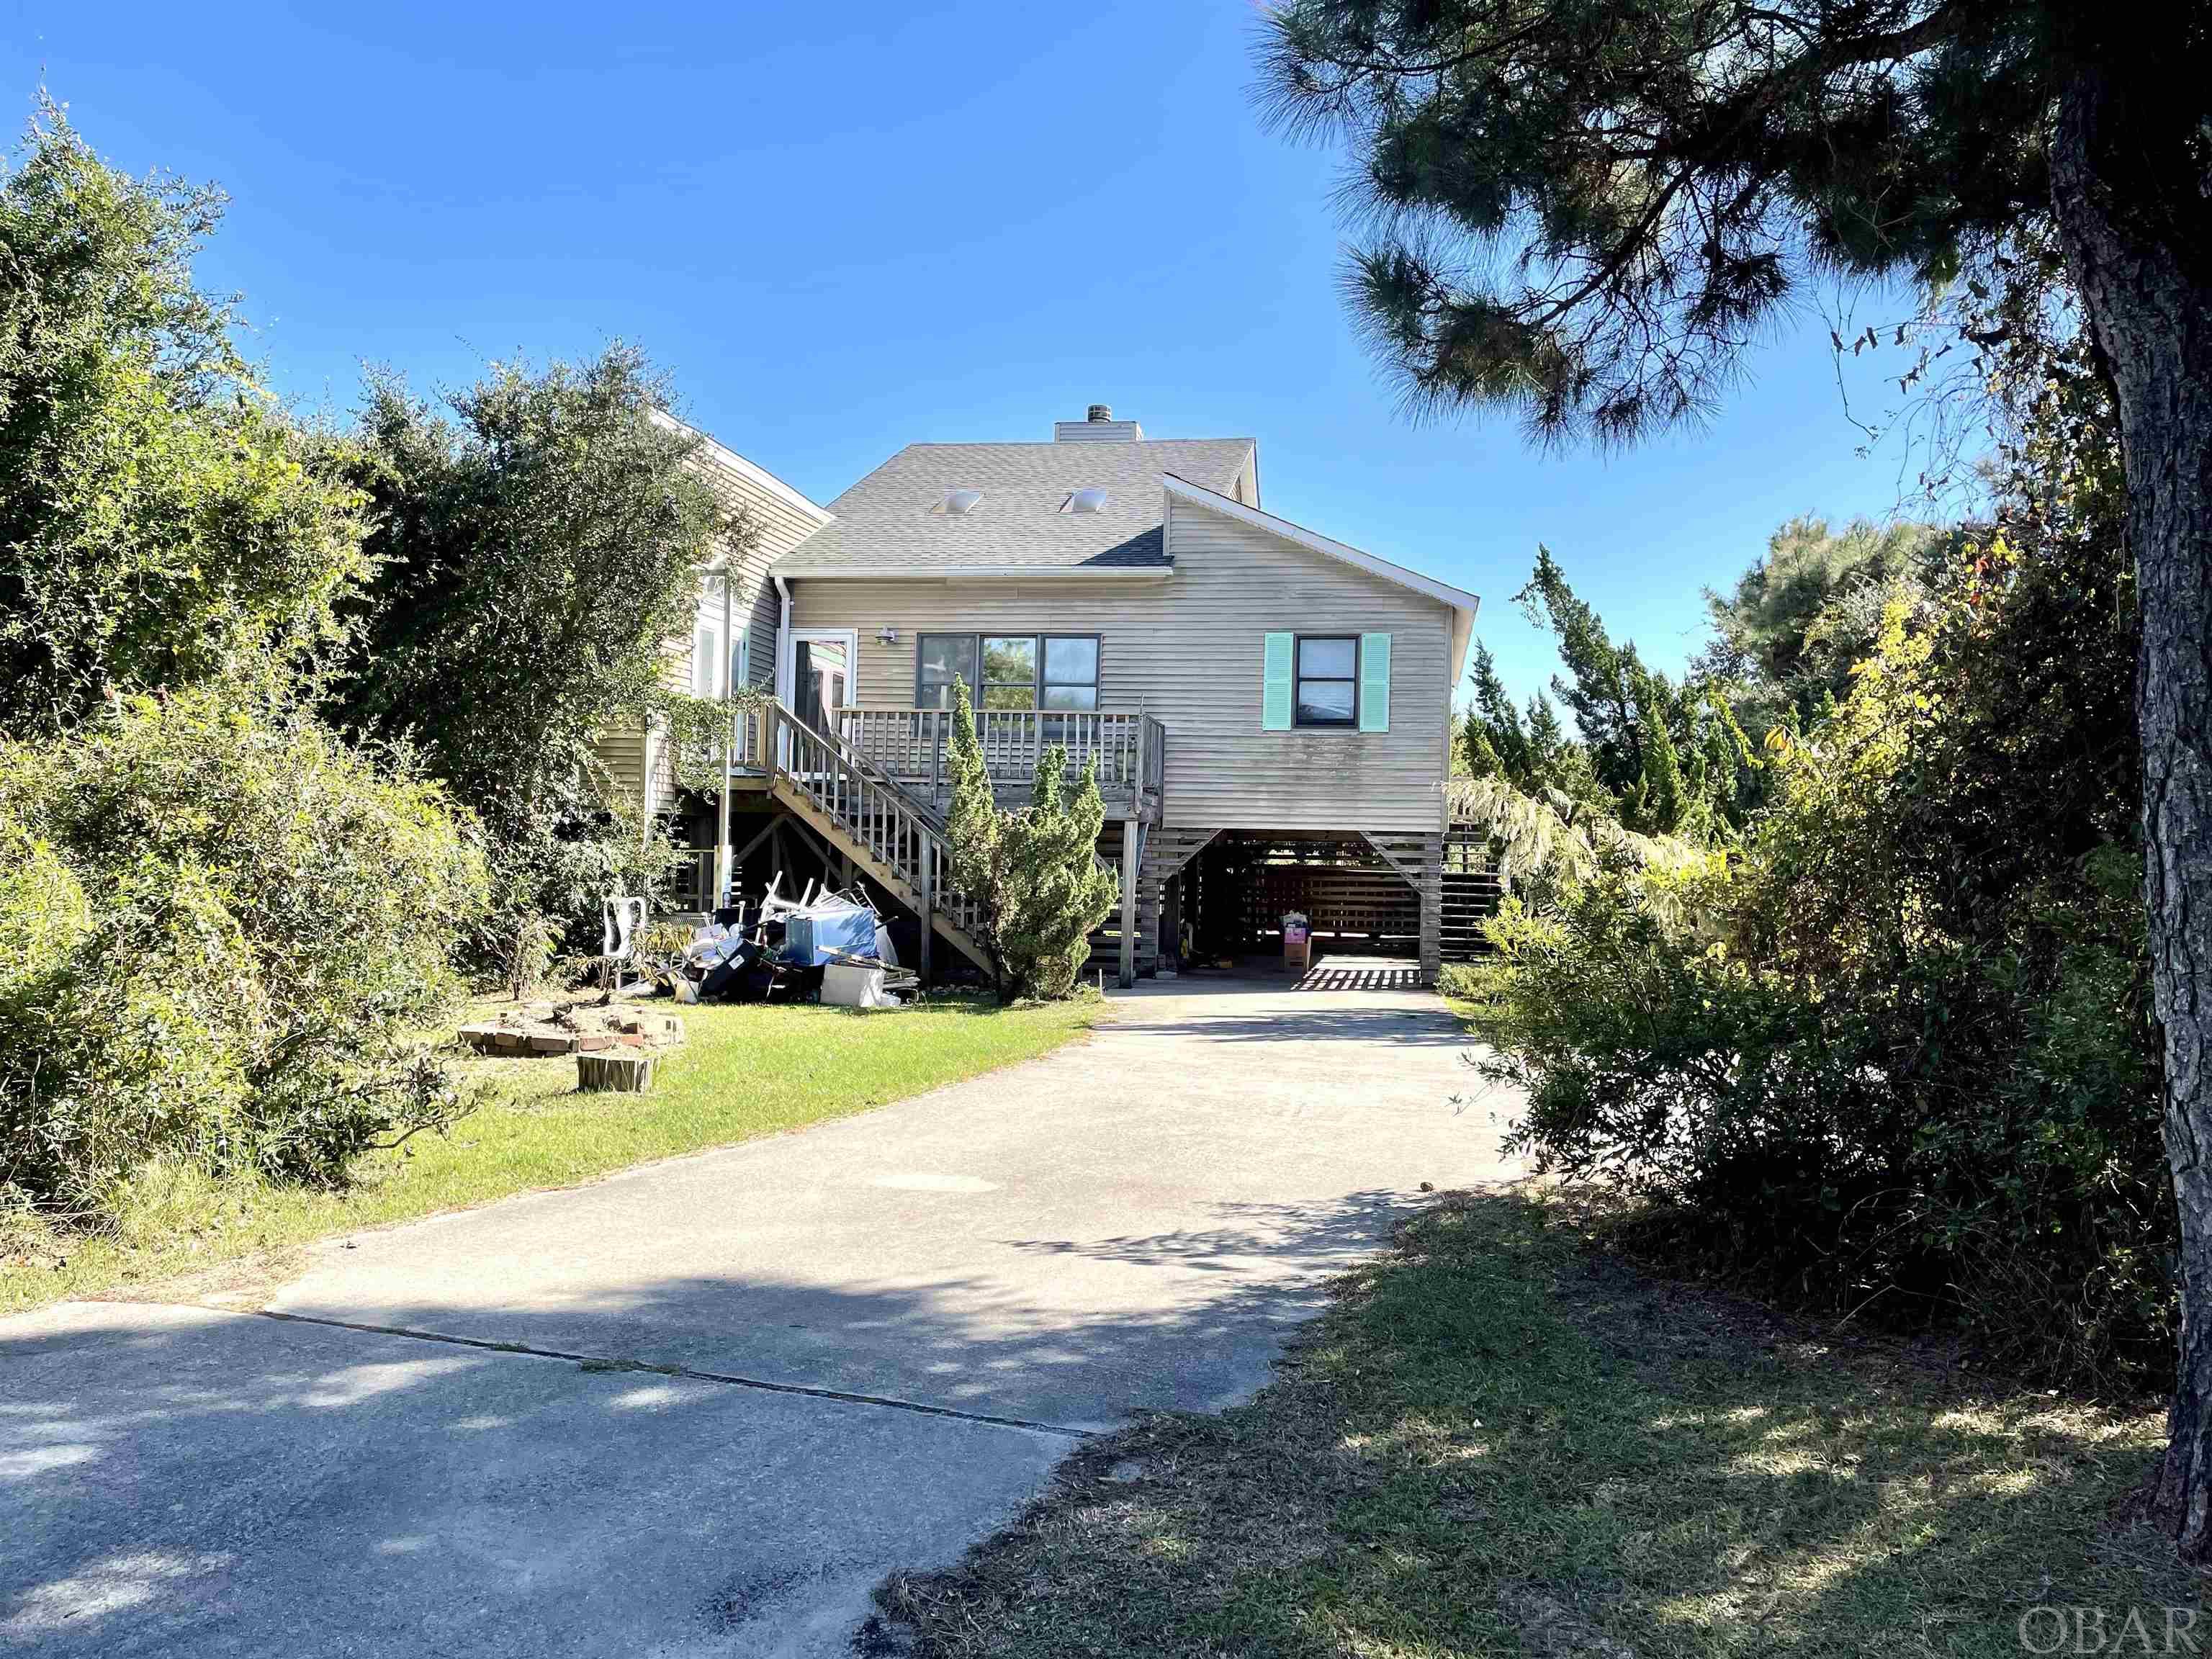 This is the one that you have been waiting for! What a perfect location for this wonderful beach home in Southern Shores. Just a short walk away from the Ninth Ave. beach access and just a little over a mile from the village of Duck with all the wonderful restaurants and shopping.  Previously used as a primary residence but with a little updating, this could be your perfect second home getaway or with the private pool in the back yard it could also function well as a rental investment property. The large 18,000 sq. ft. lot backs up to common area for added privacy to the south.